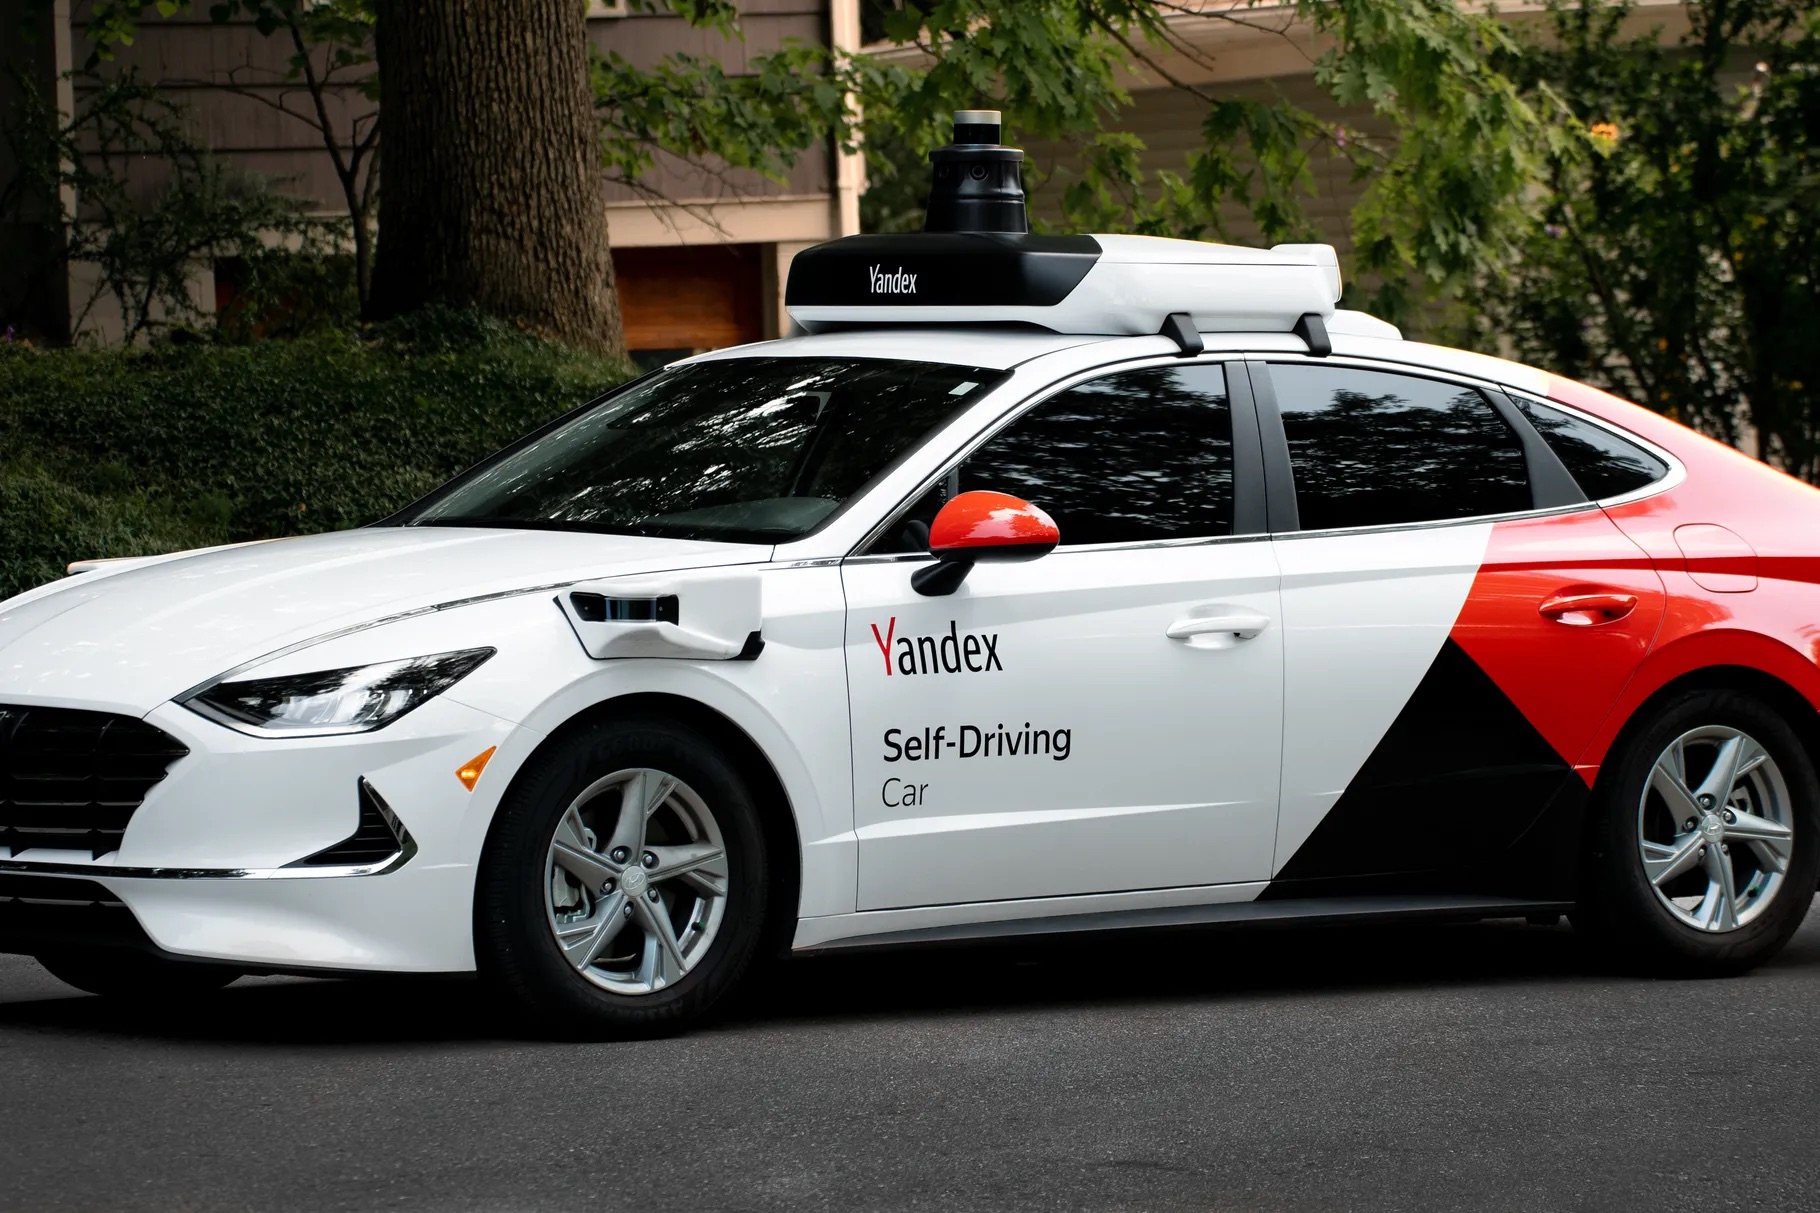 Russia’s Yandex ‘Pauses’ Autonomous Vehicle Testing in the US